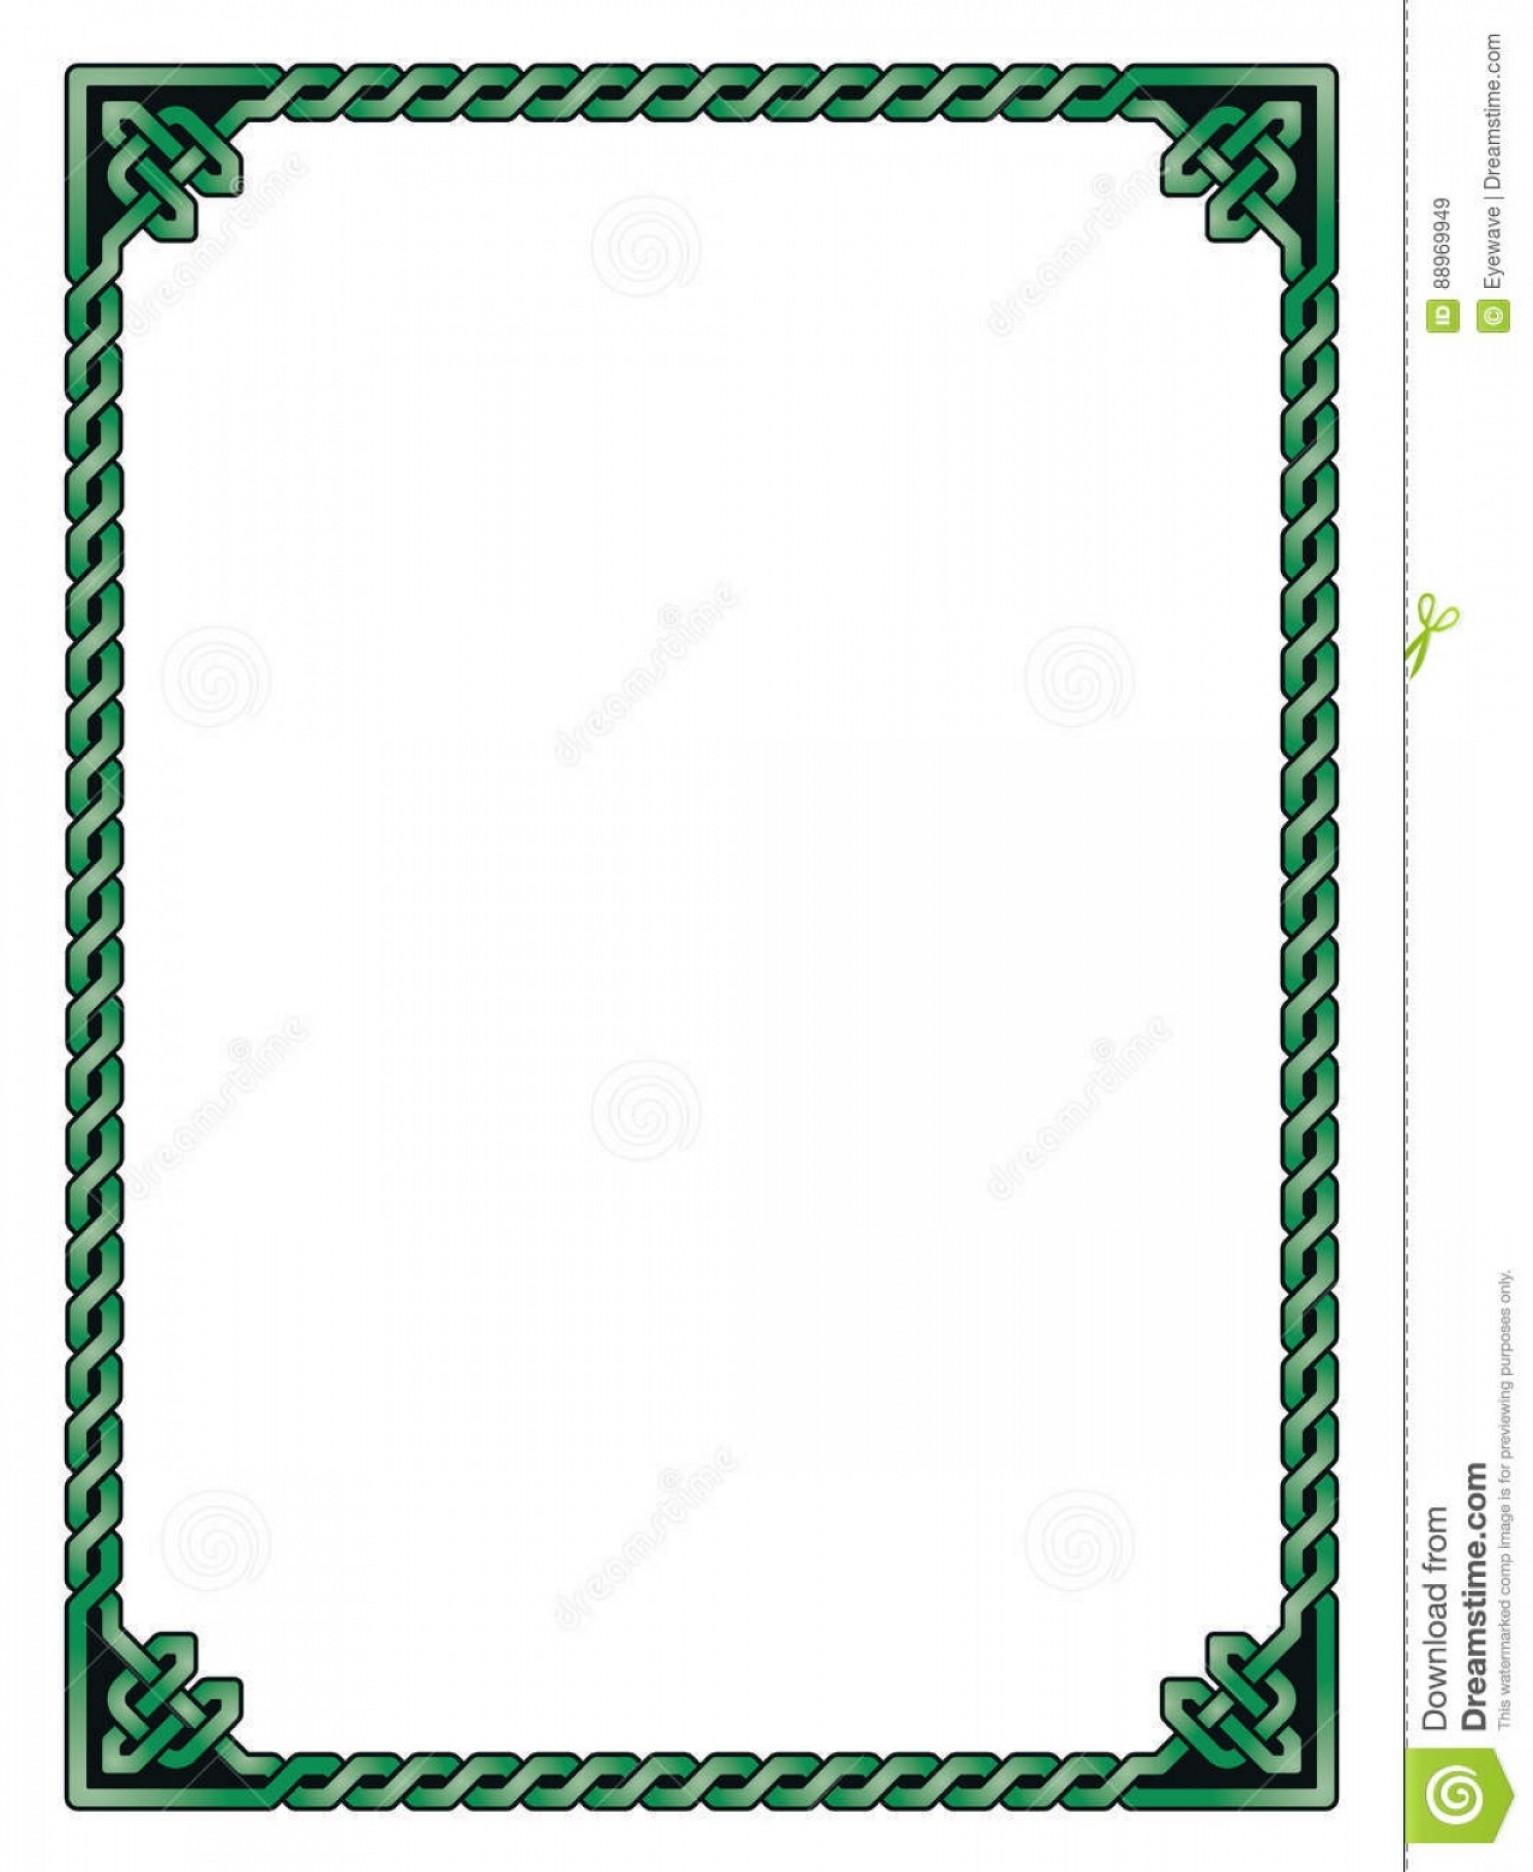 Download Rectangle Border Vector at Vectorified.com | Collection of ...